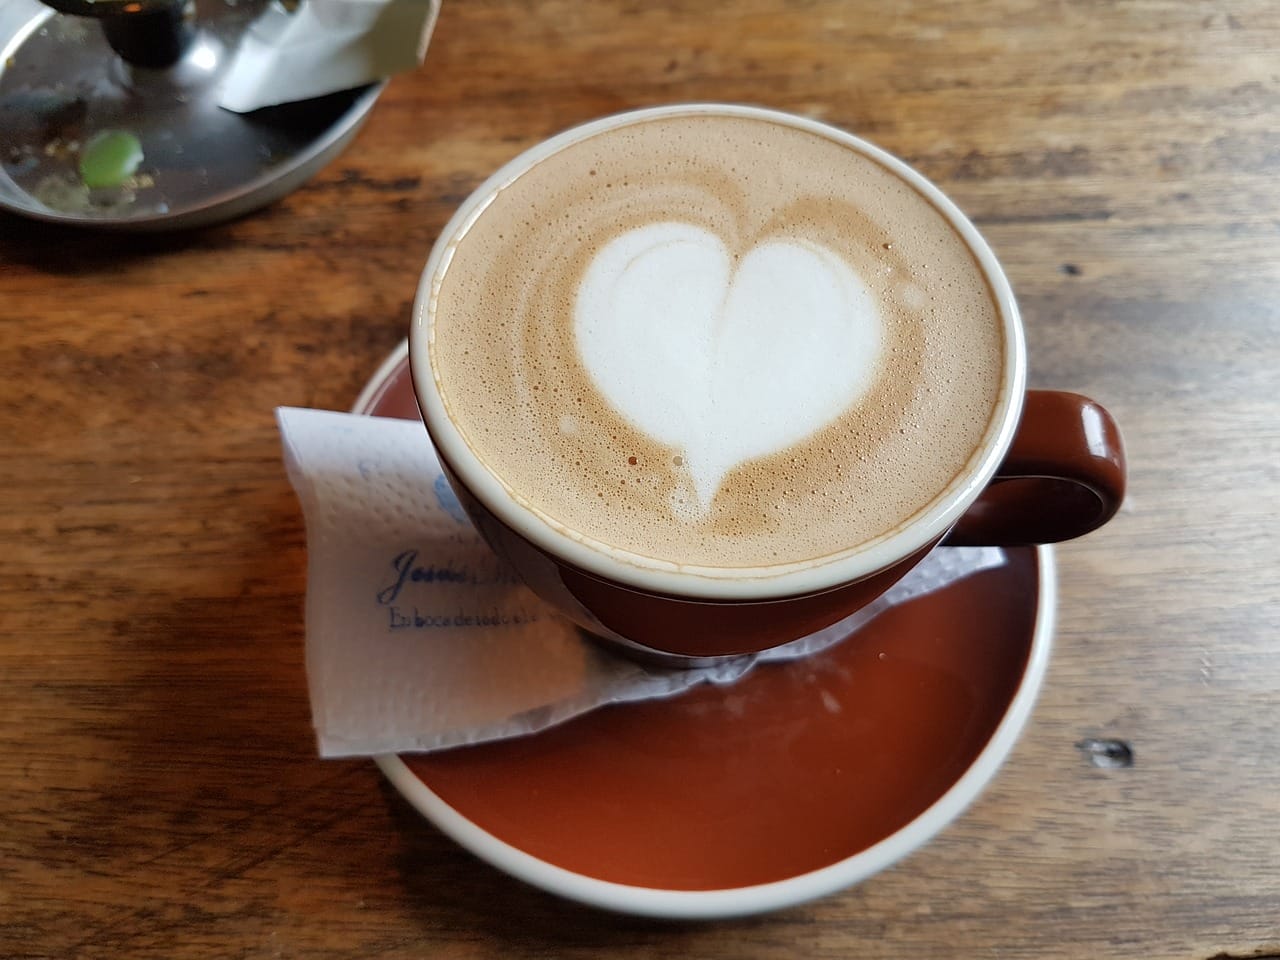  Corazon, Eje Cafetero, Colombia